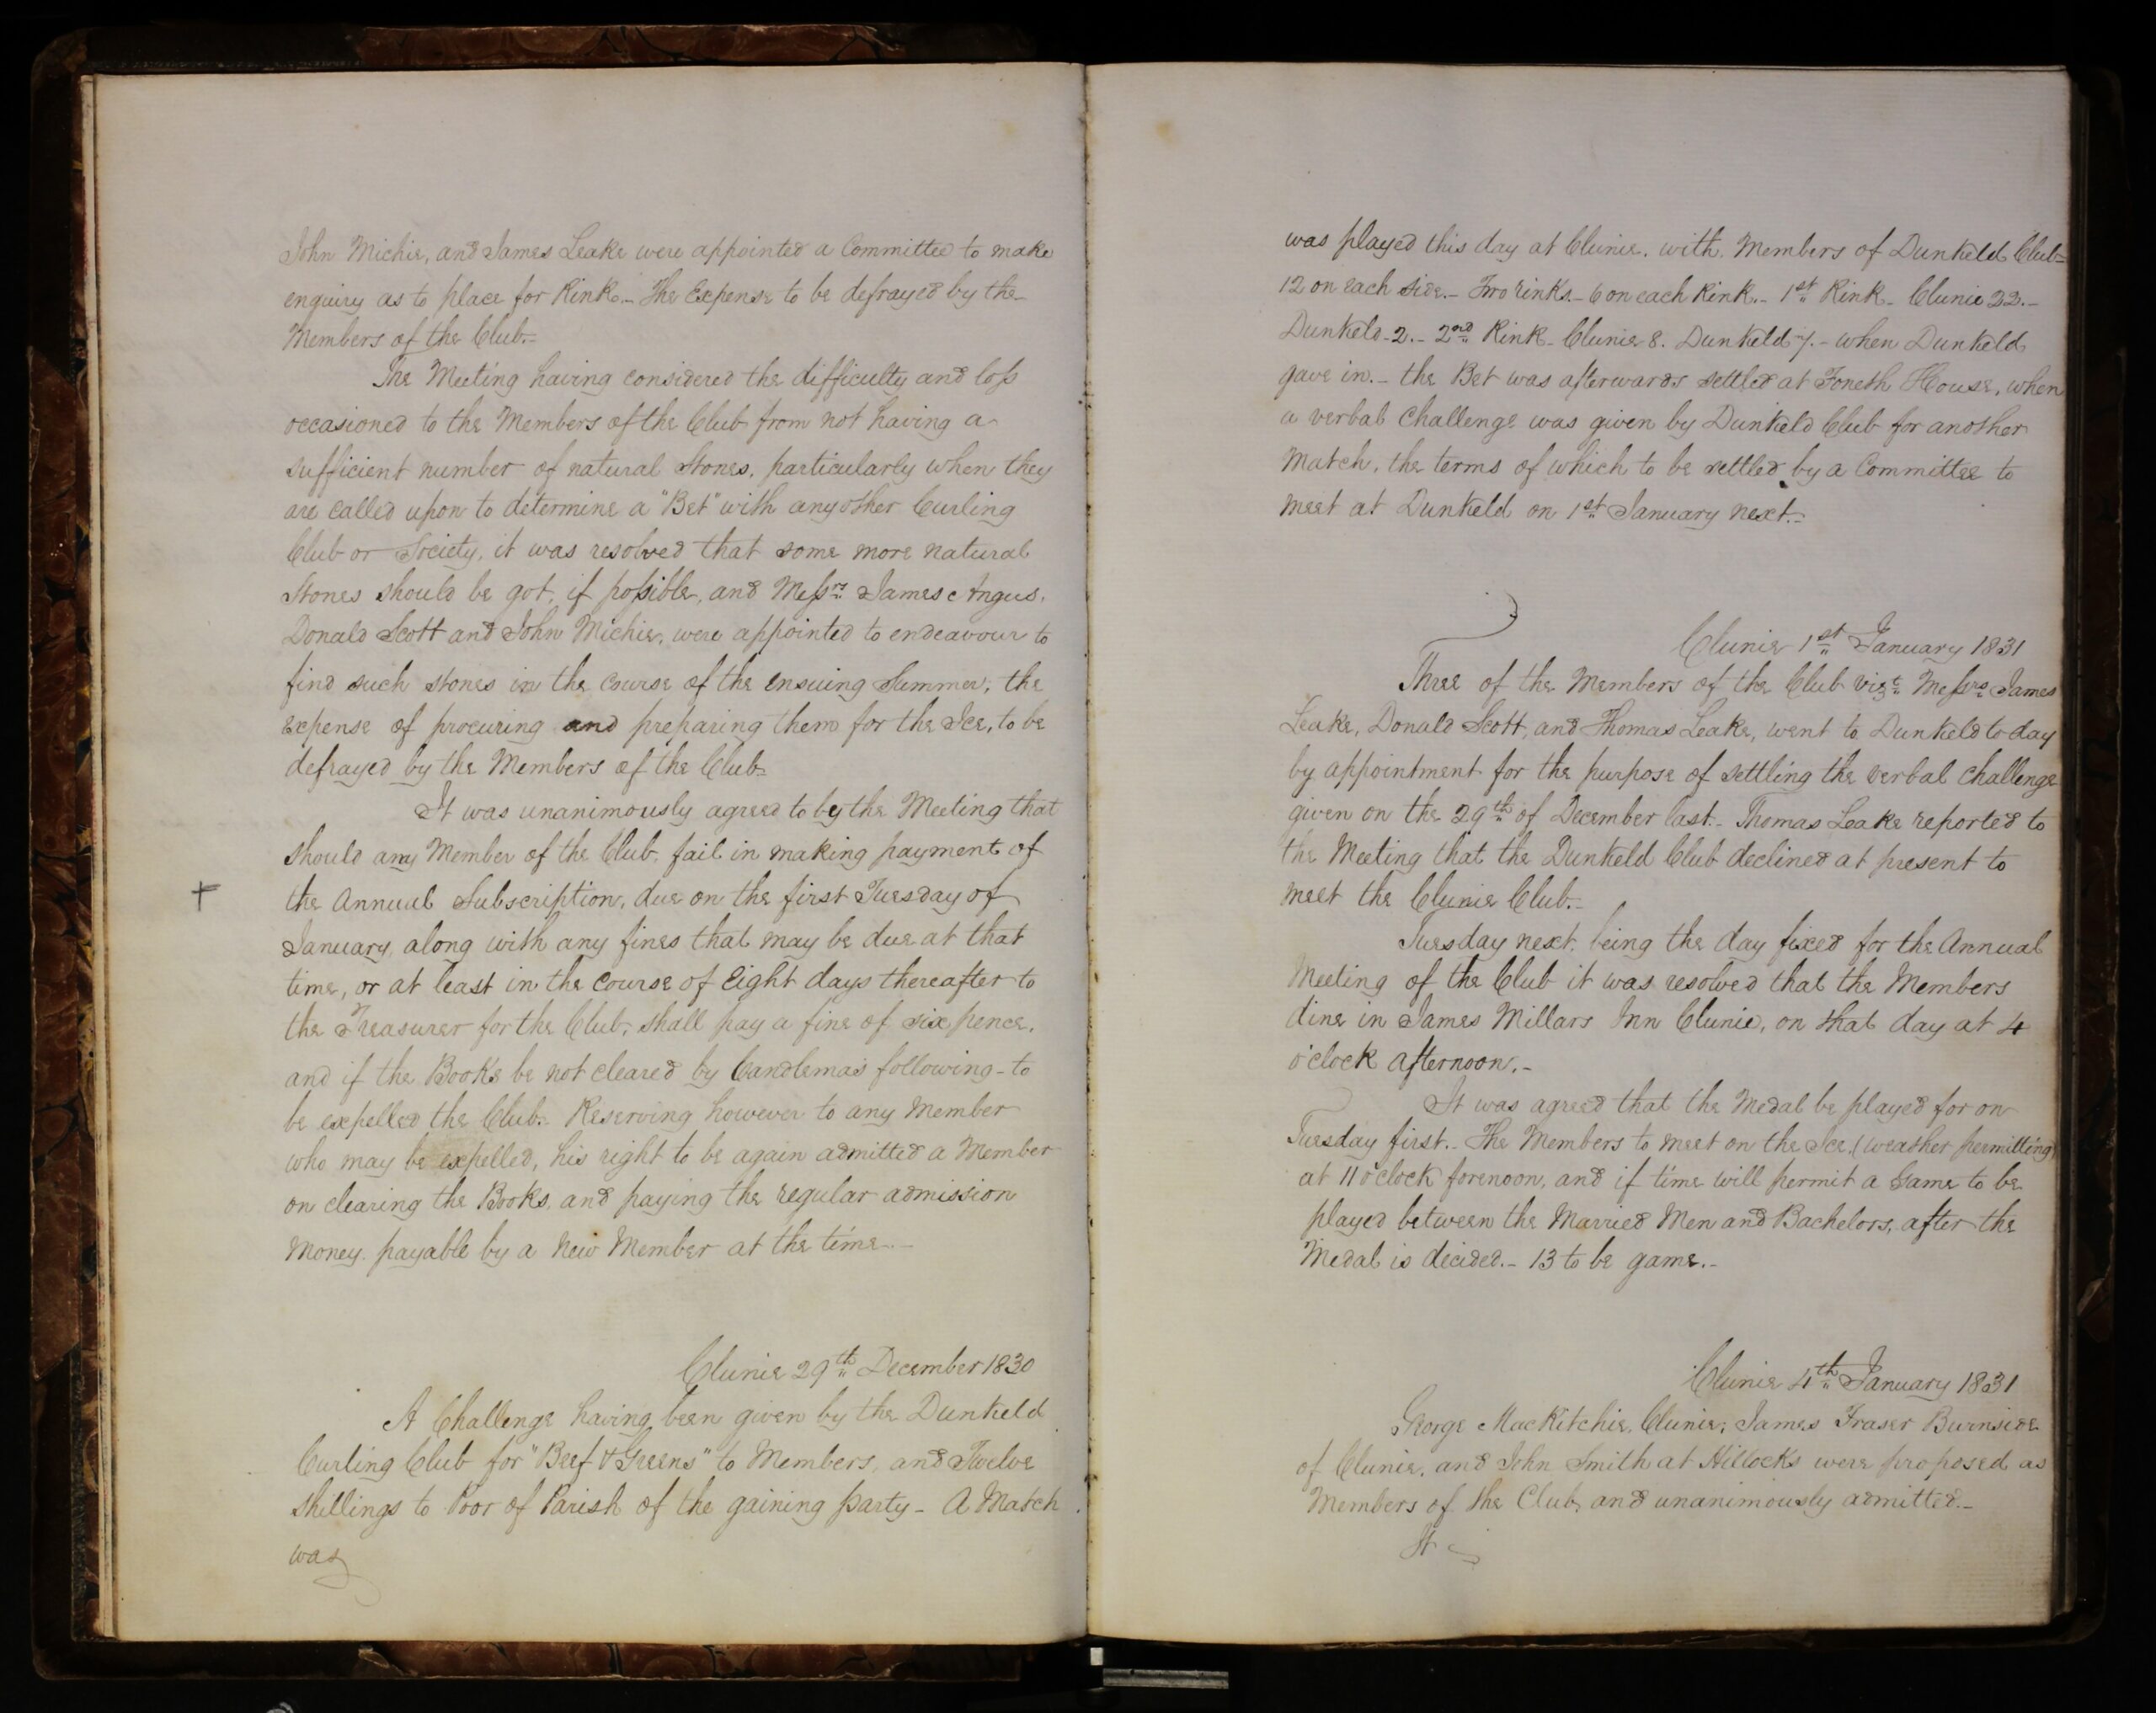 A photograph of the Curling Club Minute Book. This page focuses on a curling match and its consequences between Clunie and Dunkeld.